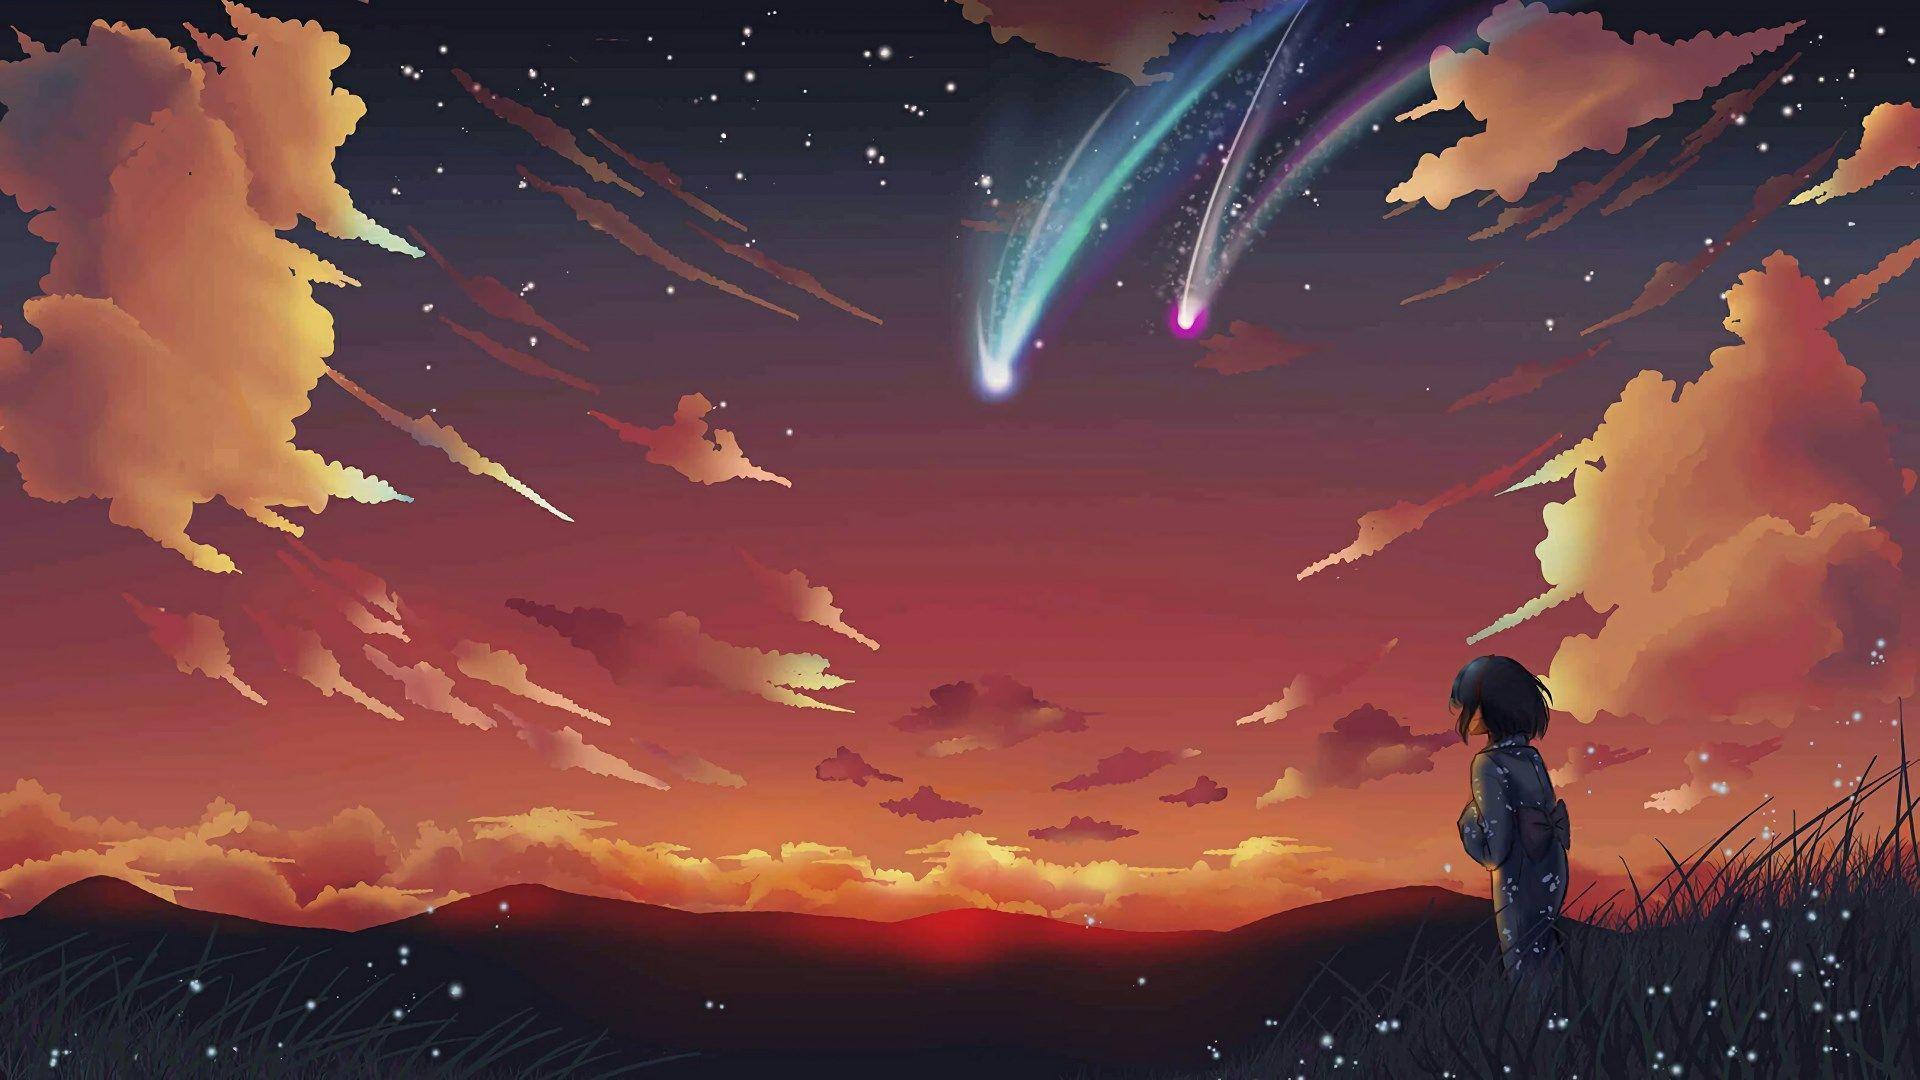 Your Name Wallpaper - Your Name Anime Wallpapers - Top Free Your Name